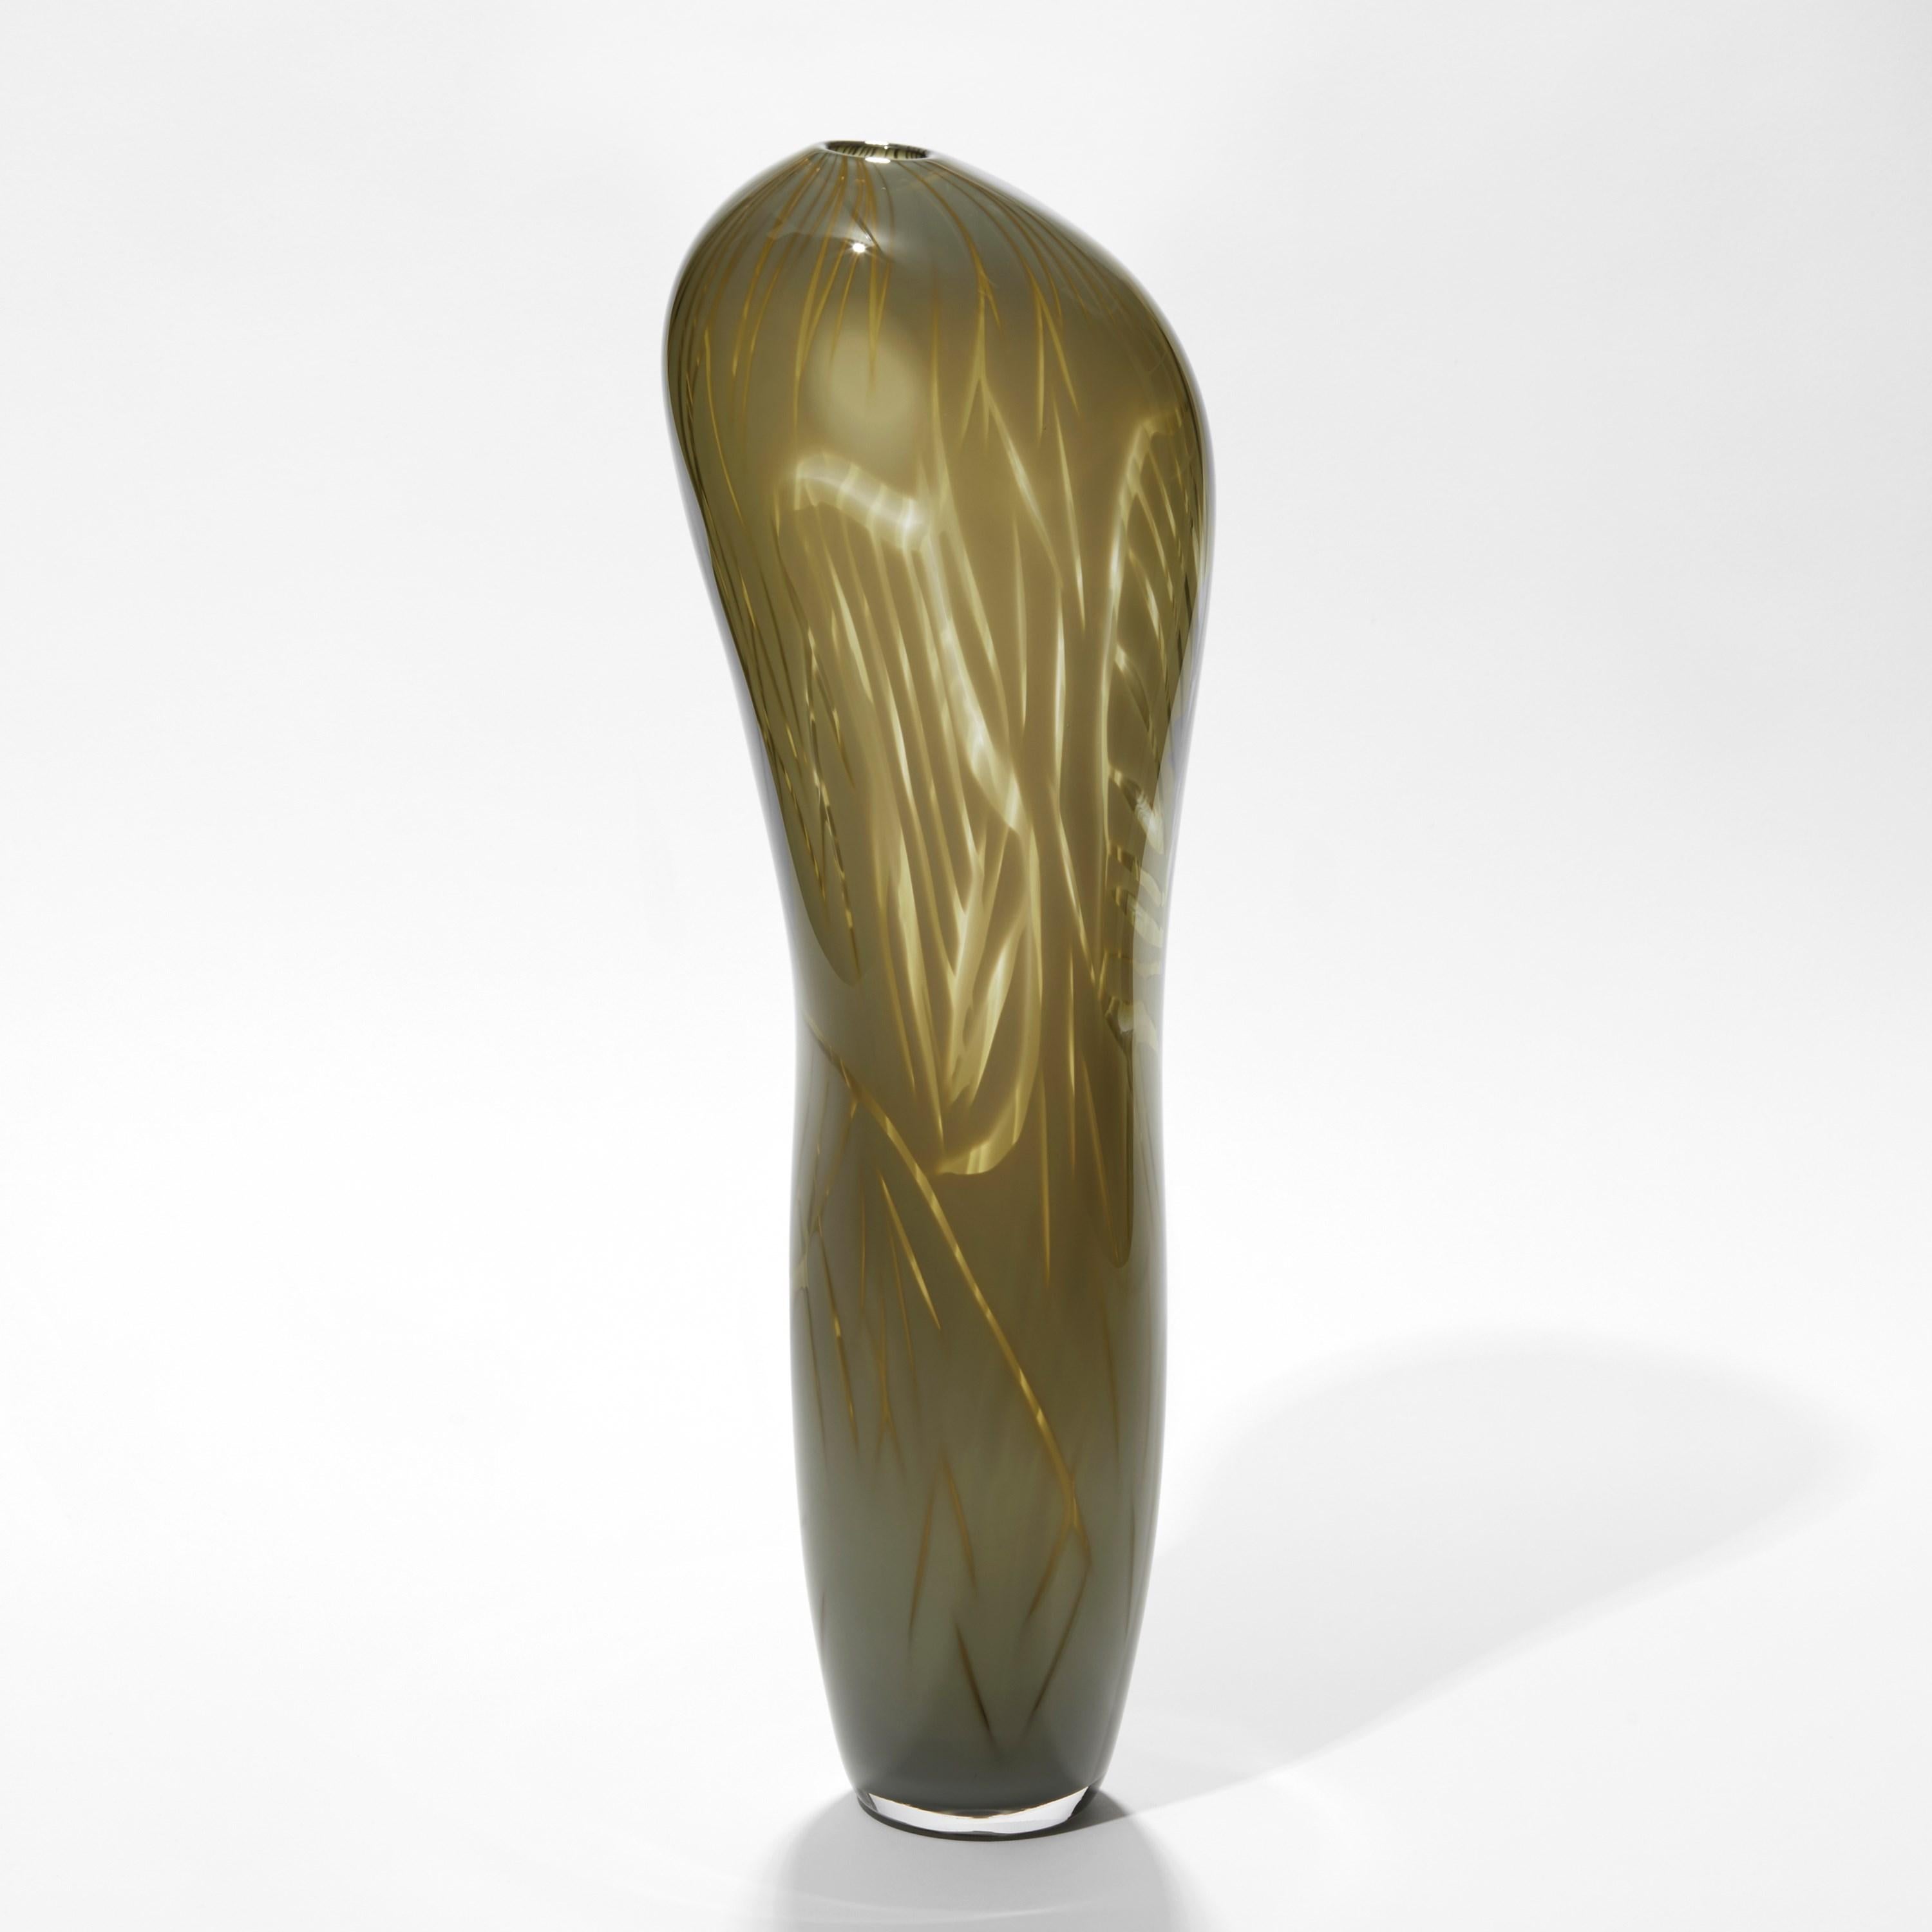 'Nesiota' is a unique glass artwork by the Canadian artist, Michèle Oberdieck.

Michèle Oberdieck explores balance and asymmetry through colour, form and surface decoration. Presenting her sculptural works as a gesture, an expressive mark, often